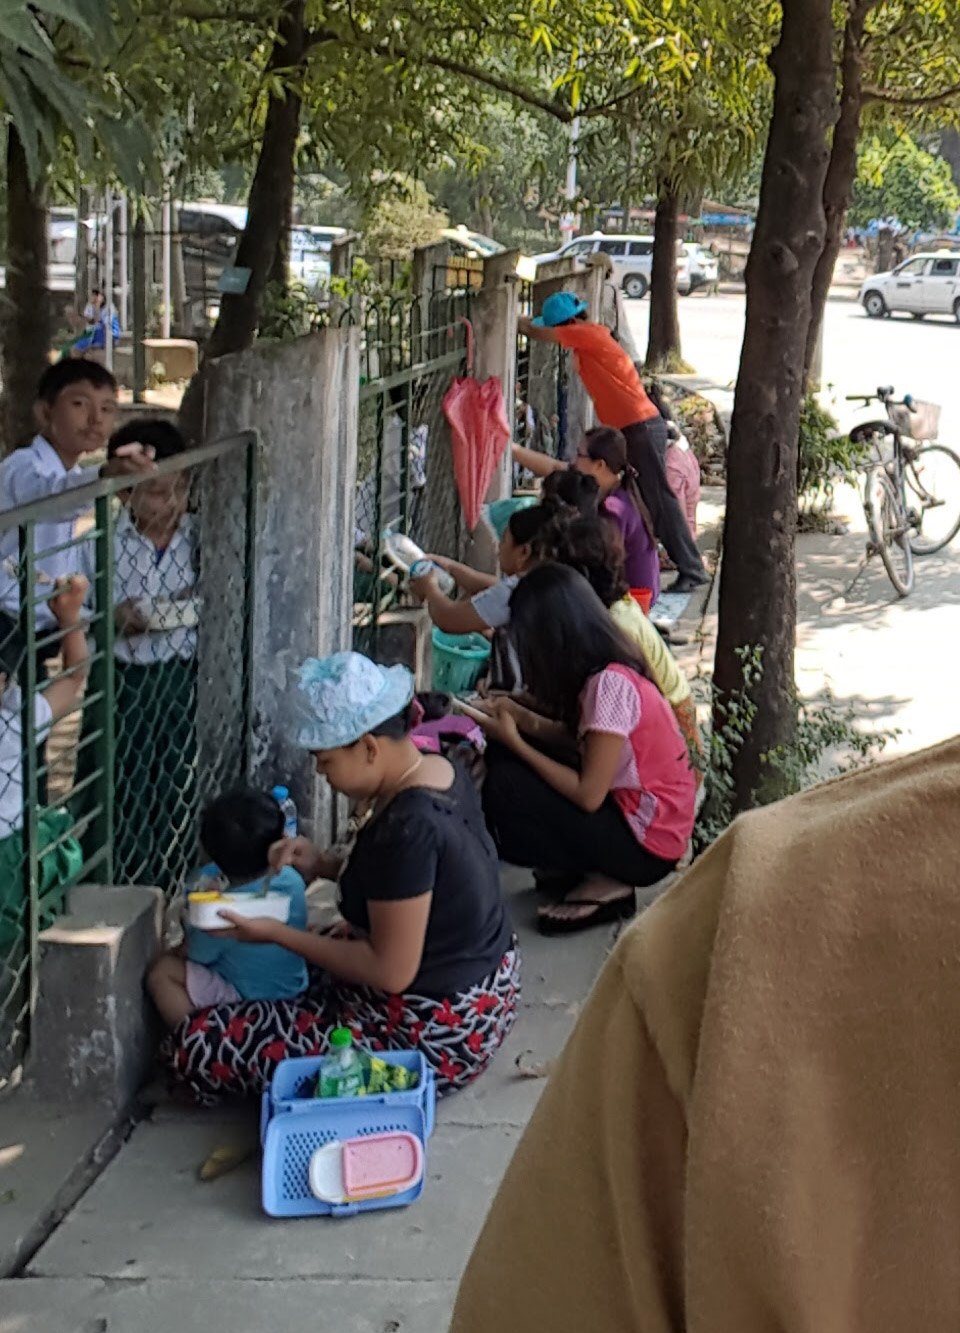 Apparently at lunch parents come to schools to literally feed their children through the fence. Not sure if it's all children and all schools, but it's certainly happening here. Also happening here is me pretending to take a selfie while actually focussing on the background. Pretty sure the kid on the left busted me.